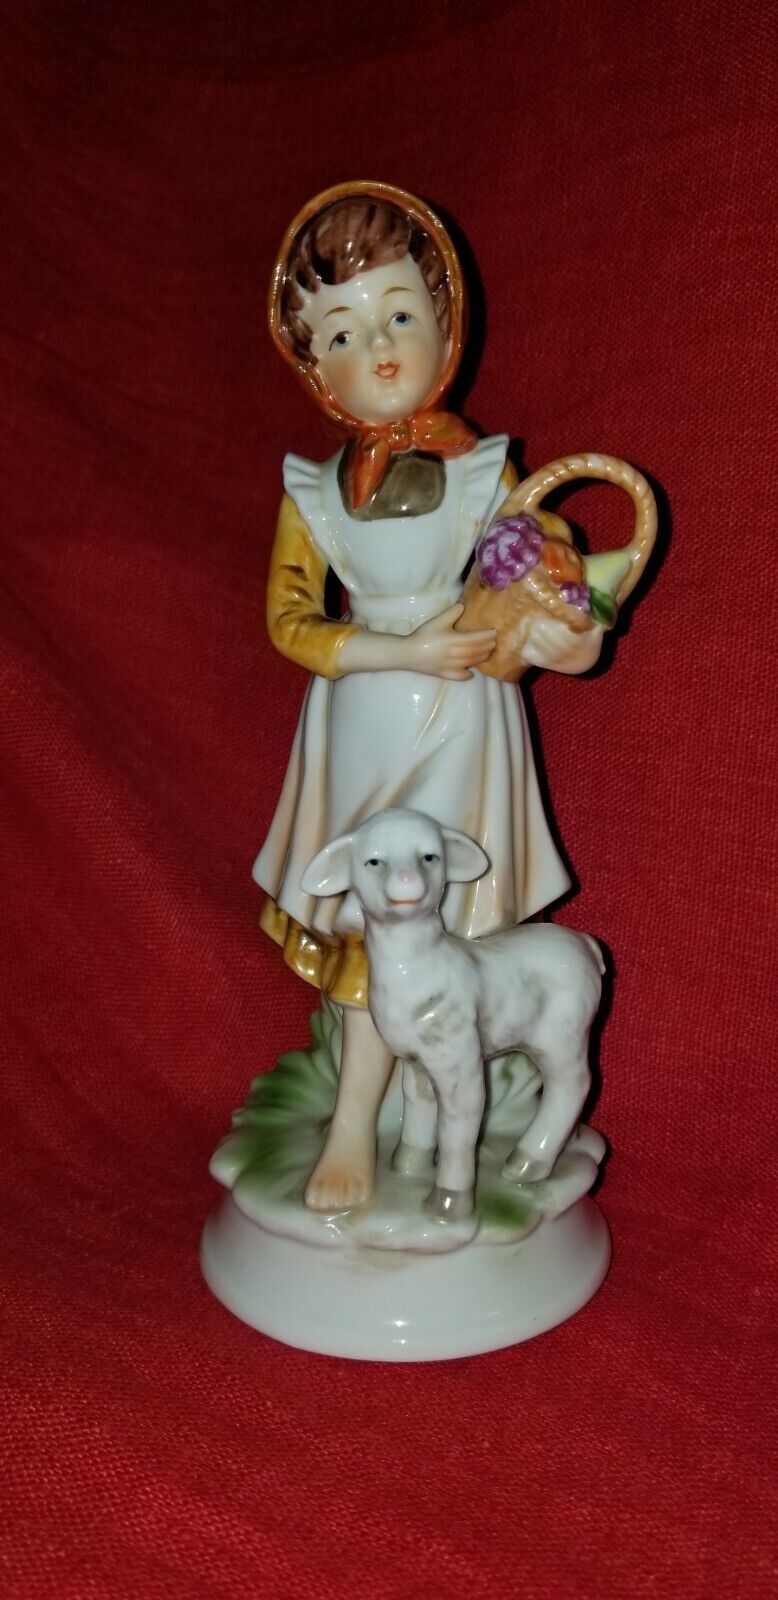 Vintage Alfretto By Maruri Girl with Lamb Figurine. Excellent condition. Used.